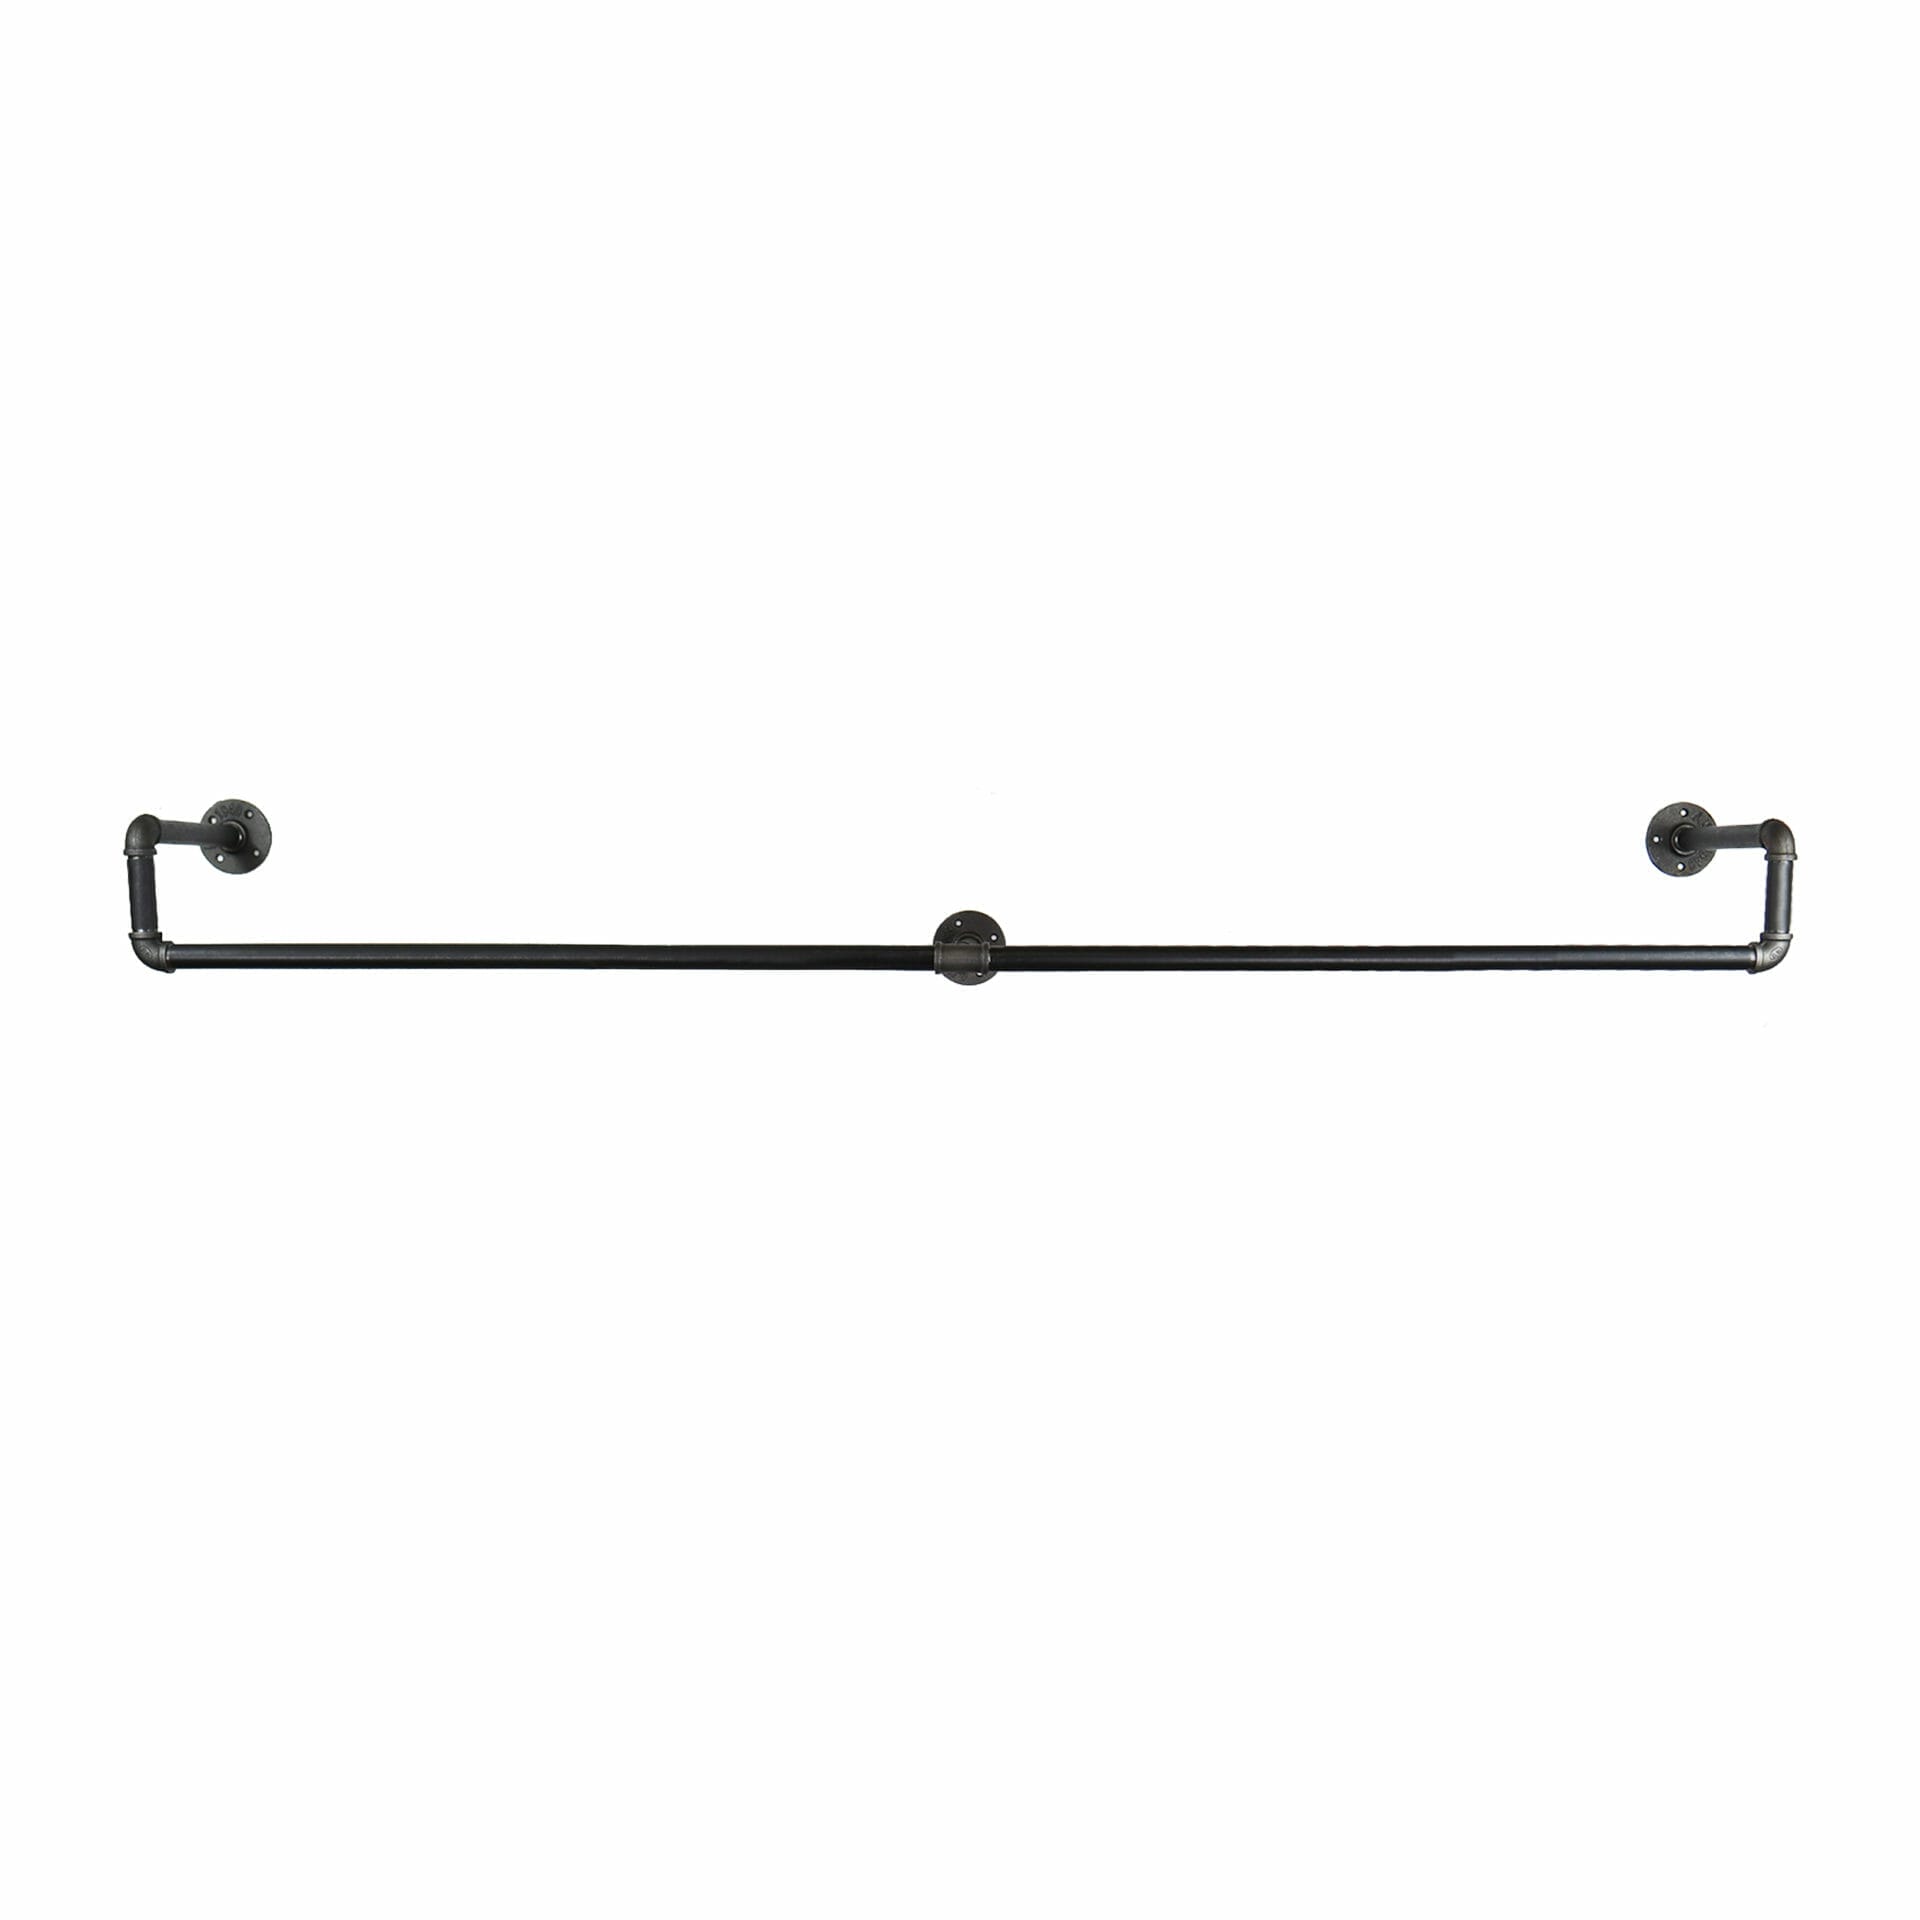 Wall Mounted Drop Down Clothes Rail | Industrial Raw Steel Pipe Style ...